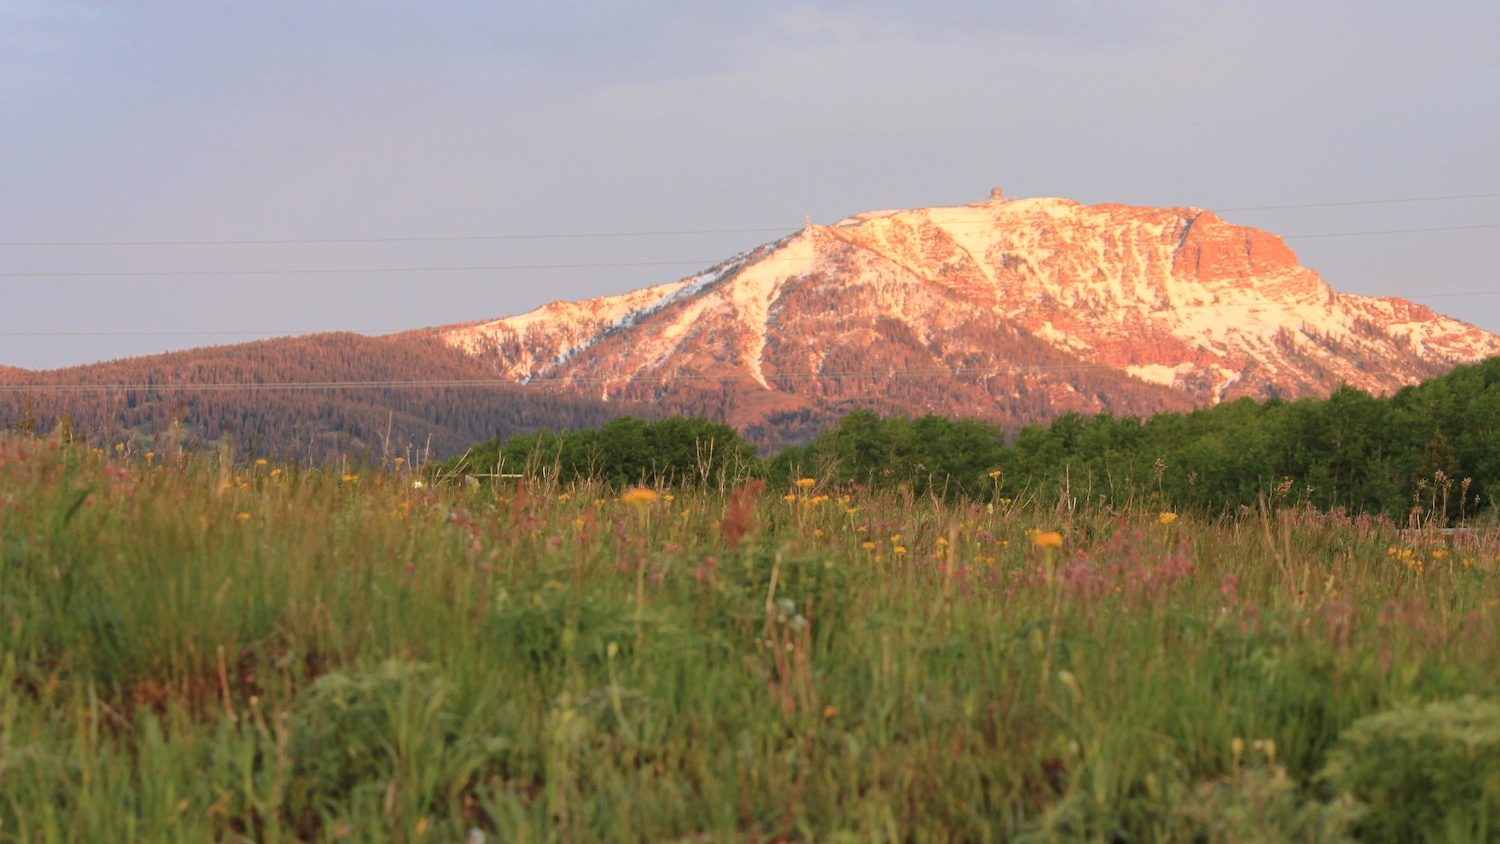 sunrise glow on a mountain with a field of flowers in the foreground